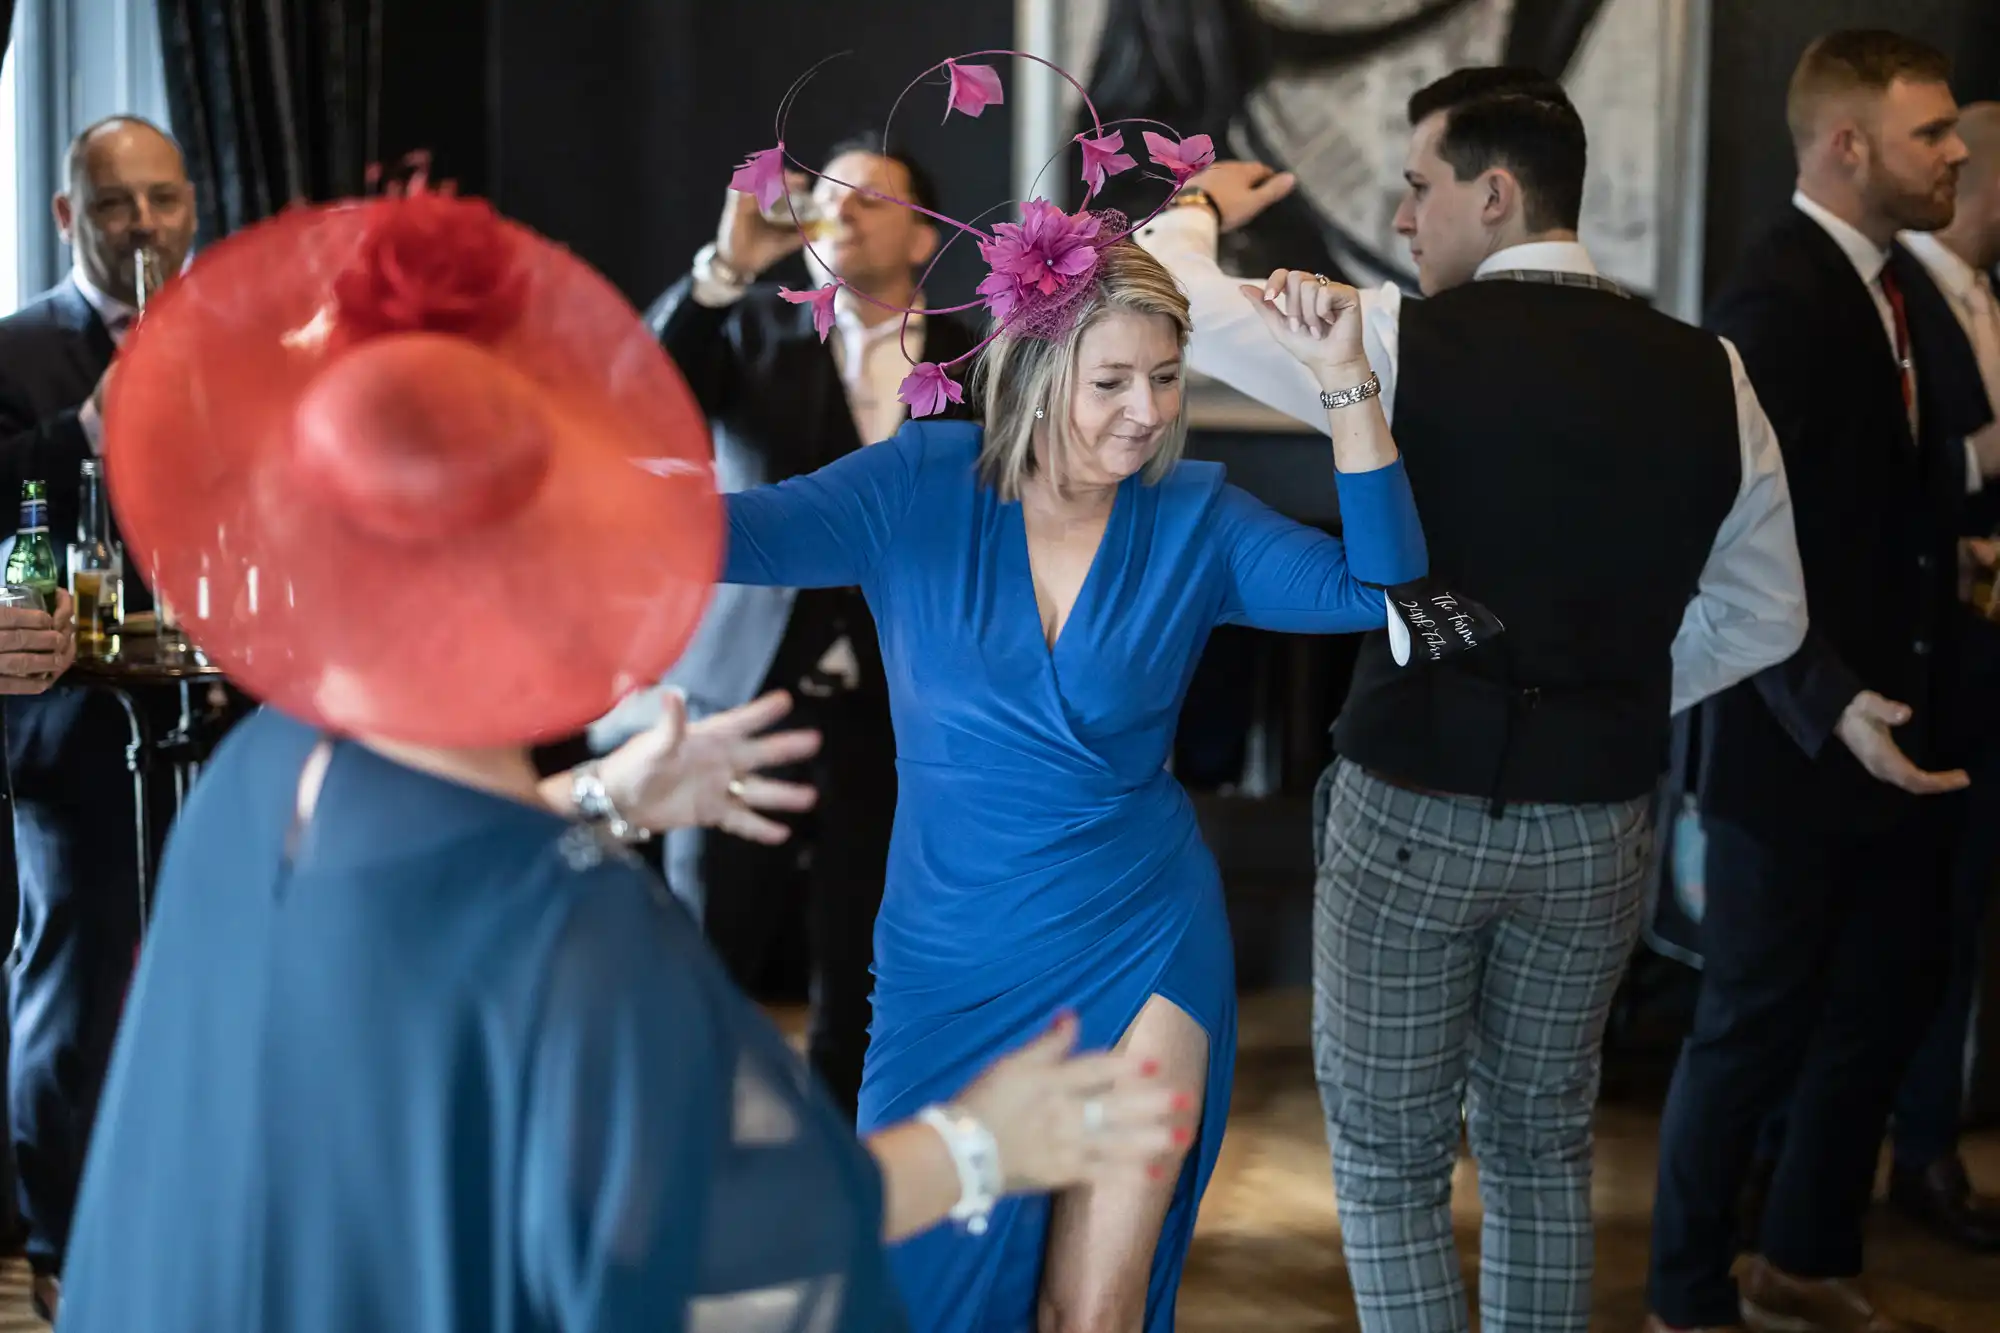 People dressed in formal attire are dancing at an indoor social event. A woman in a blue dress is prominently featured in the foreground, wearing a fascinator with pink flowers.